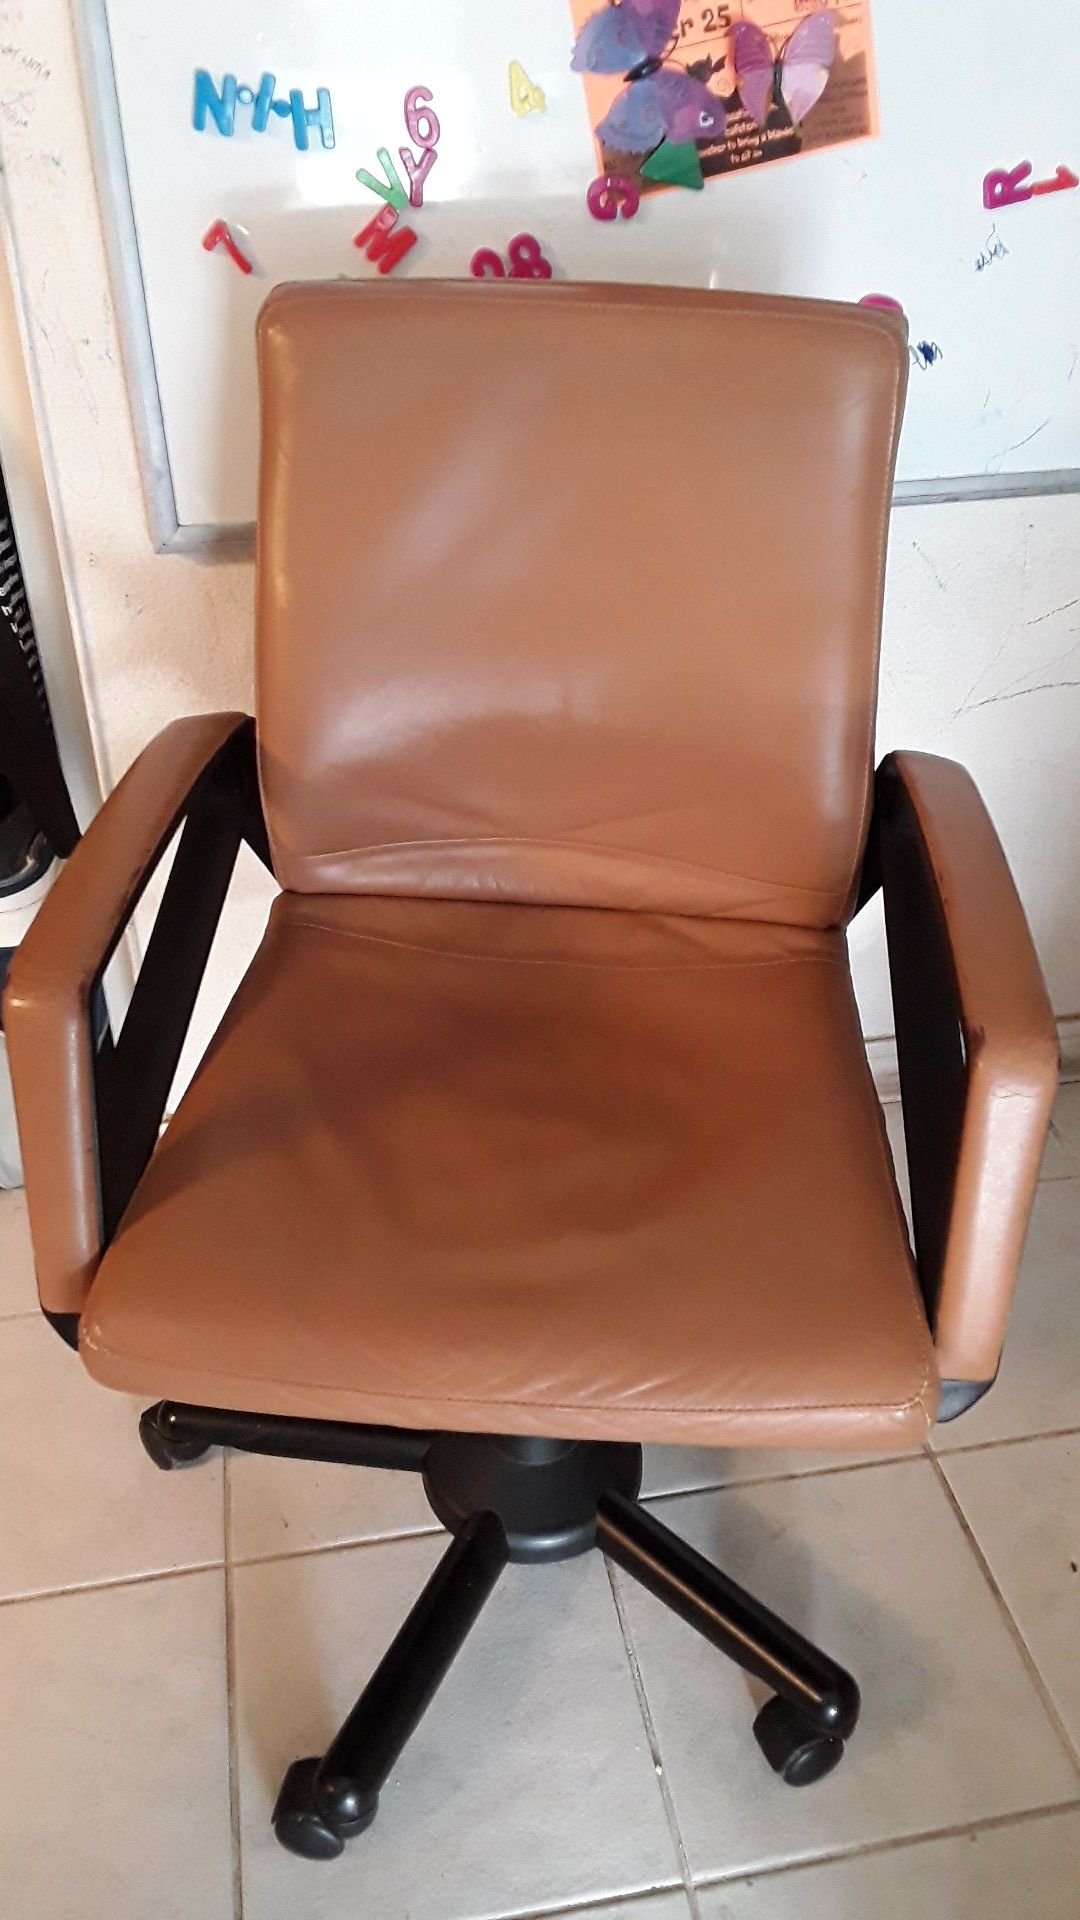 Office chair $20 for each. I have more